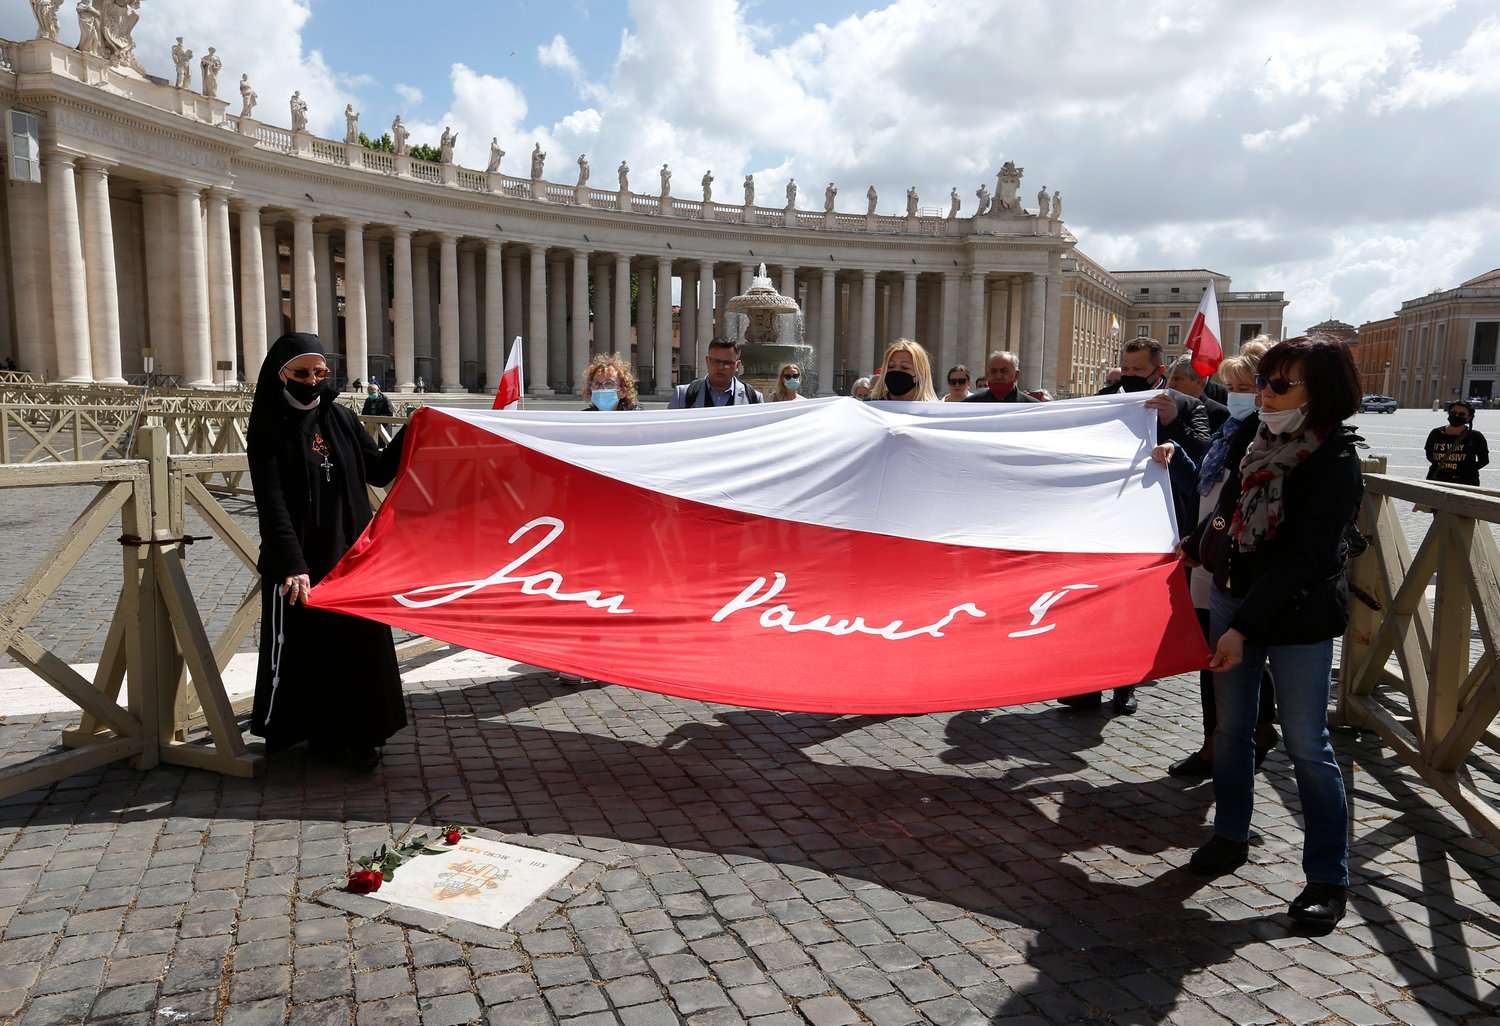 People carry a flag with the name of St. John Paul II over the spot of the May 13, 1981, assassination attempt against the Polish pope, in St. Peter’s Square at the Vatican May 13, 2021. Cardinal Stanislaw Dziwisz, the former secretary of St. John Paul II, and a small group of Catholics gathered in the square to mark the 40th anniversary of the shooting.